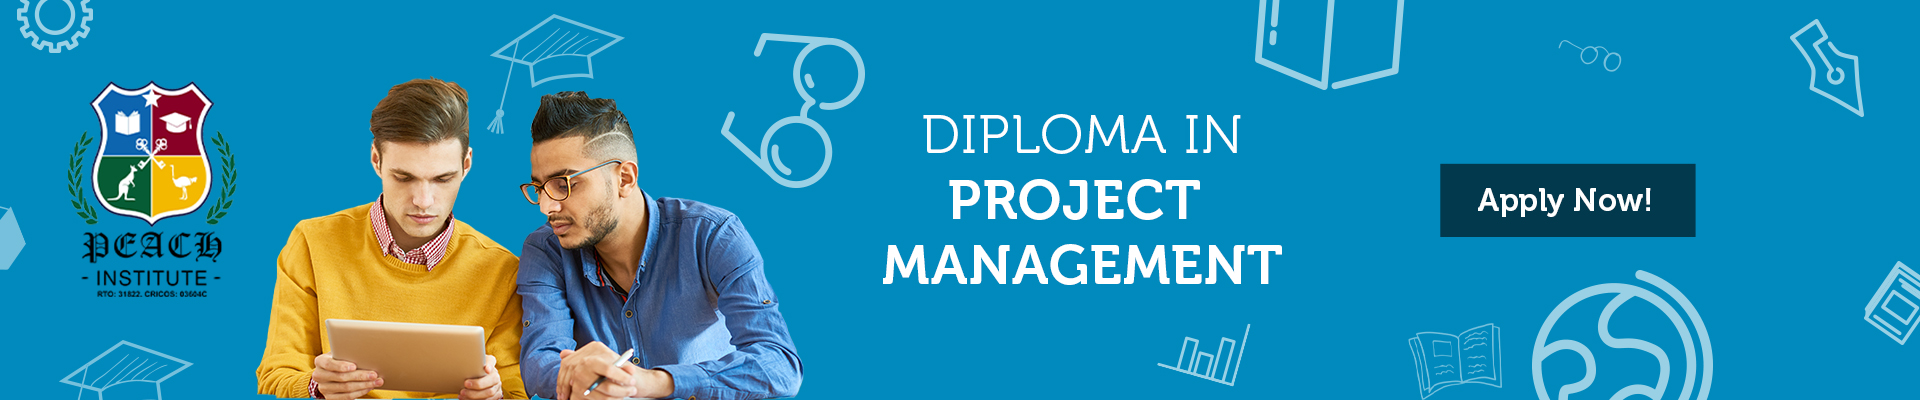 Diploma In Project Management